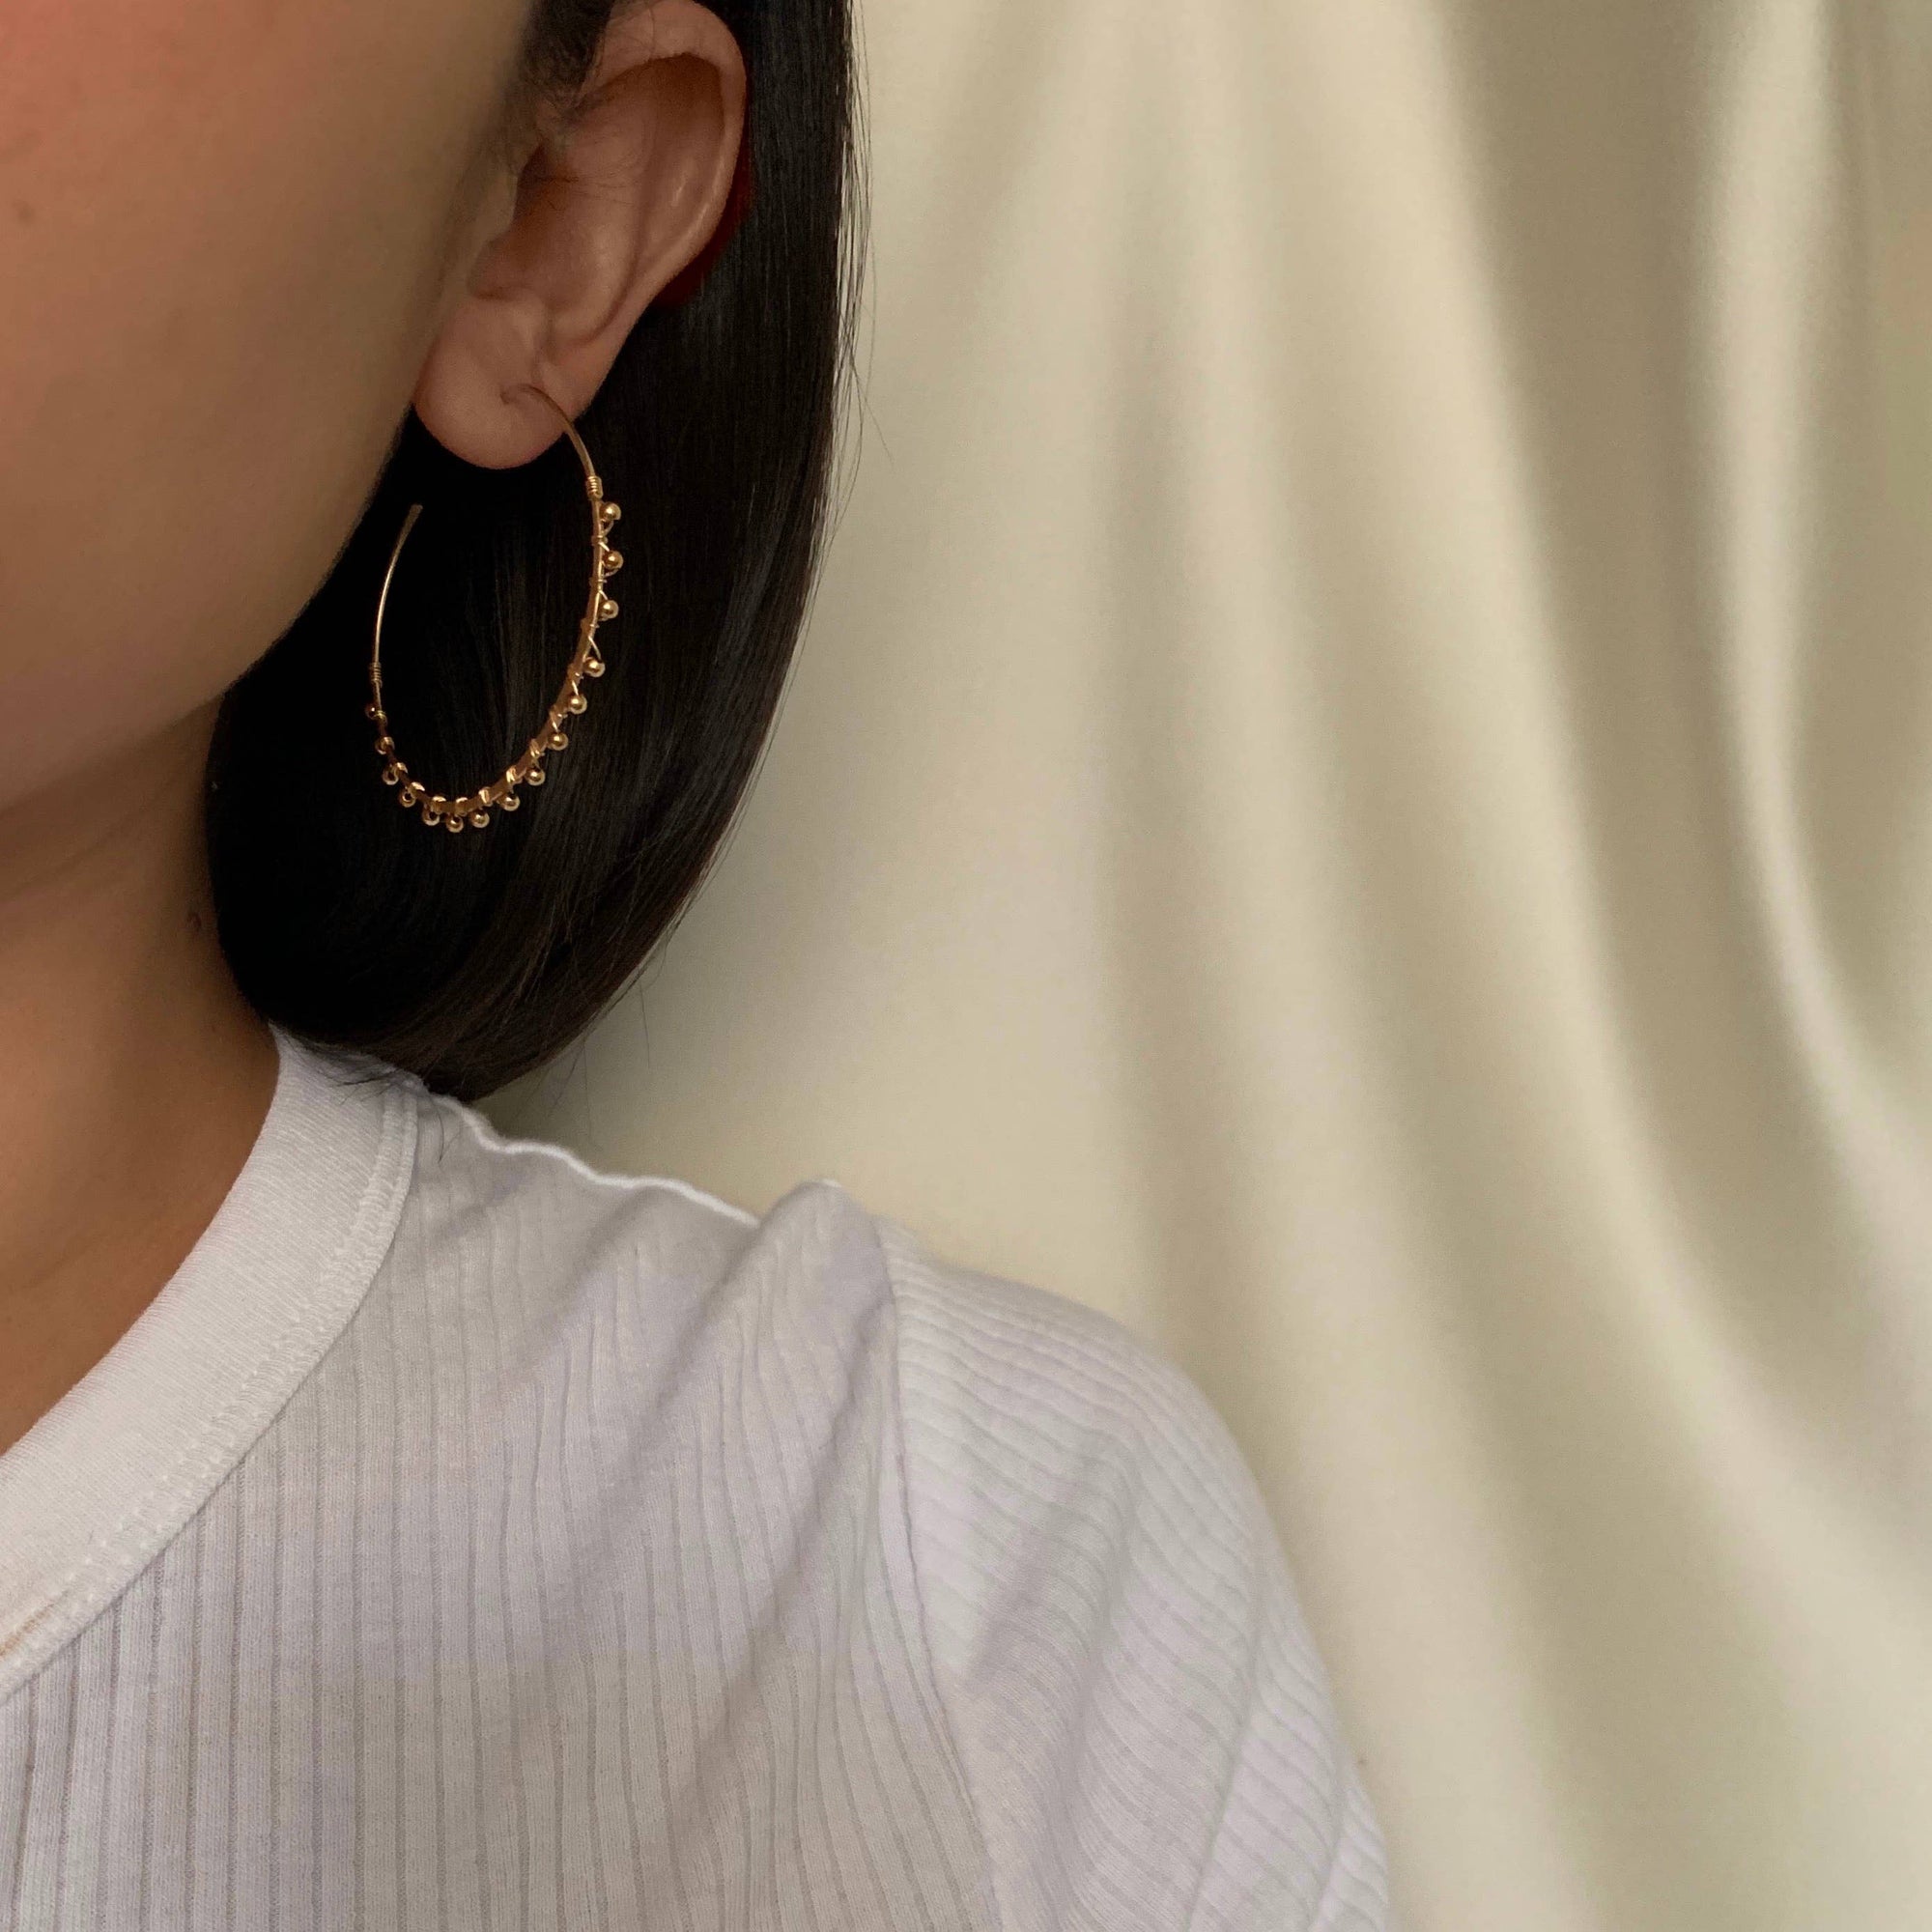 The Caviar Hoops by Points Jewelry